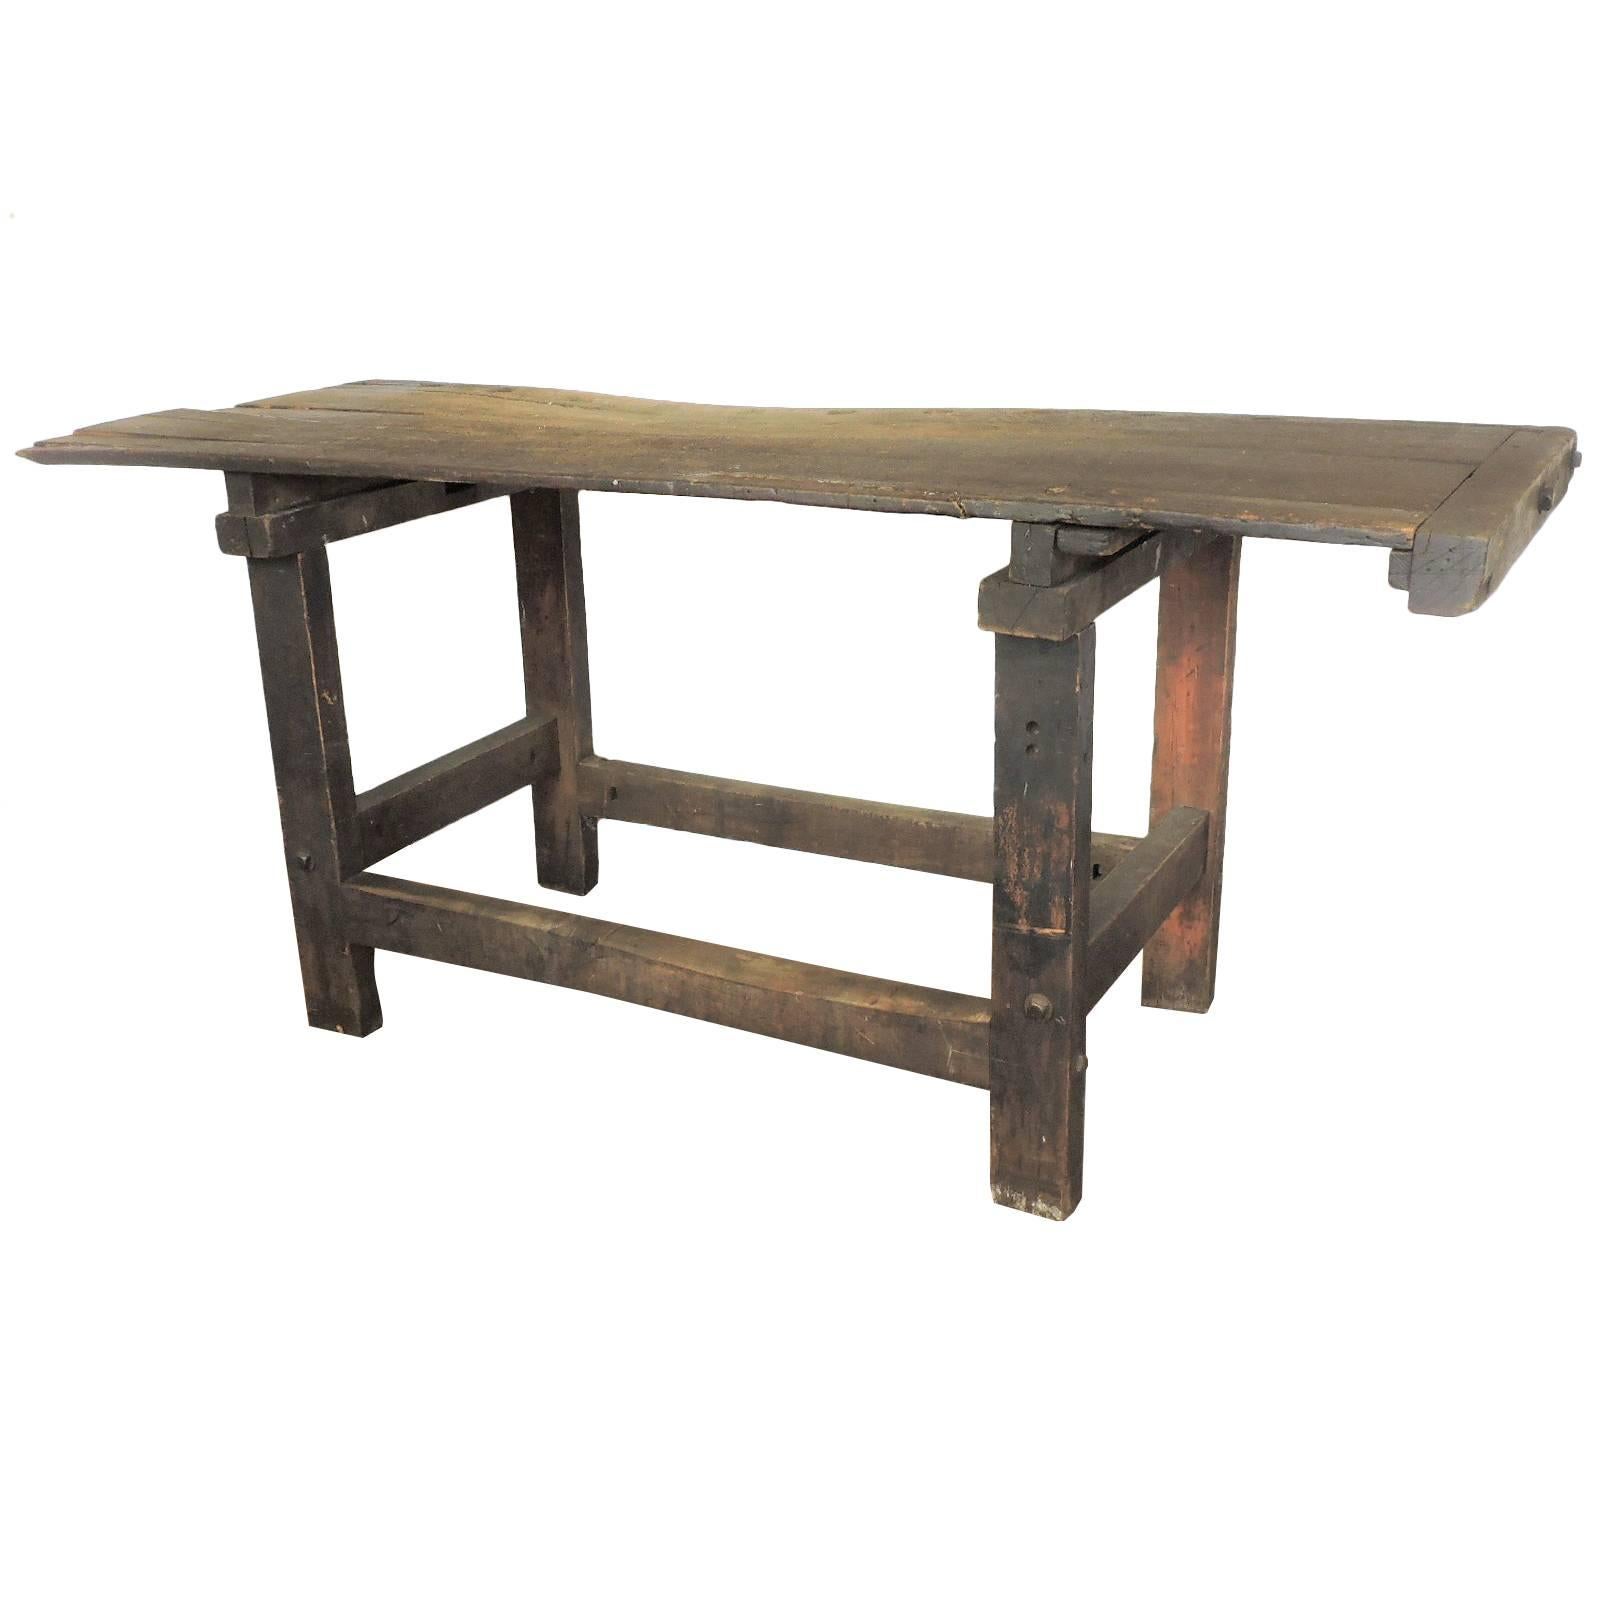 Antique American Industrial Carpenters Work Table Bench